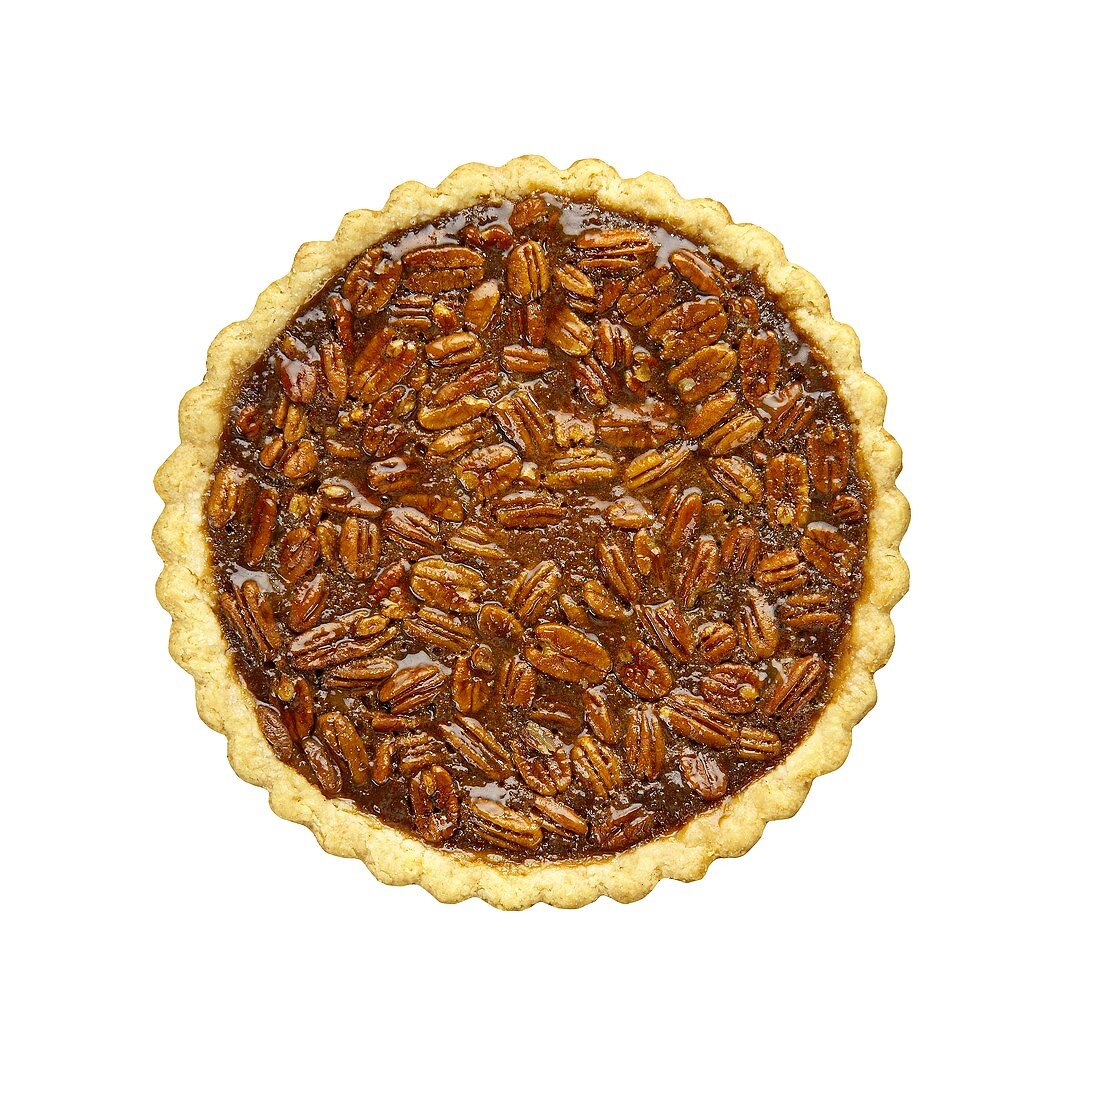 Overhead of a Whole Pecan Pie on a White Background